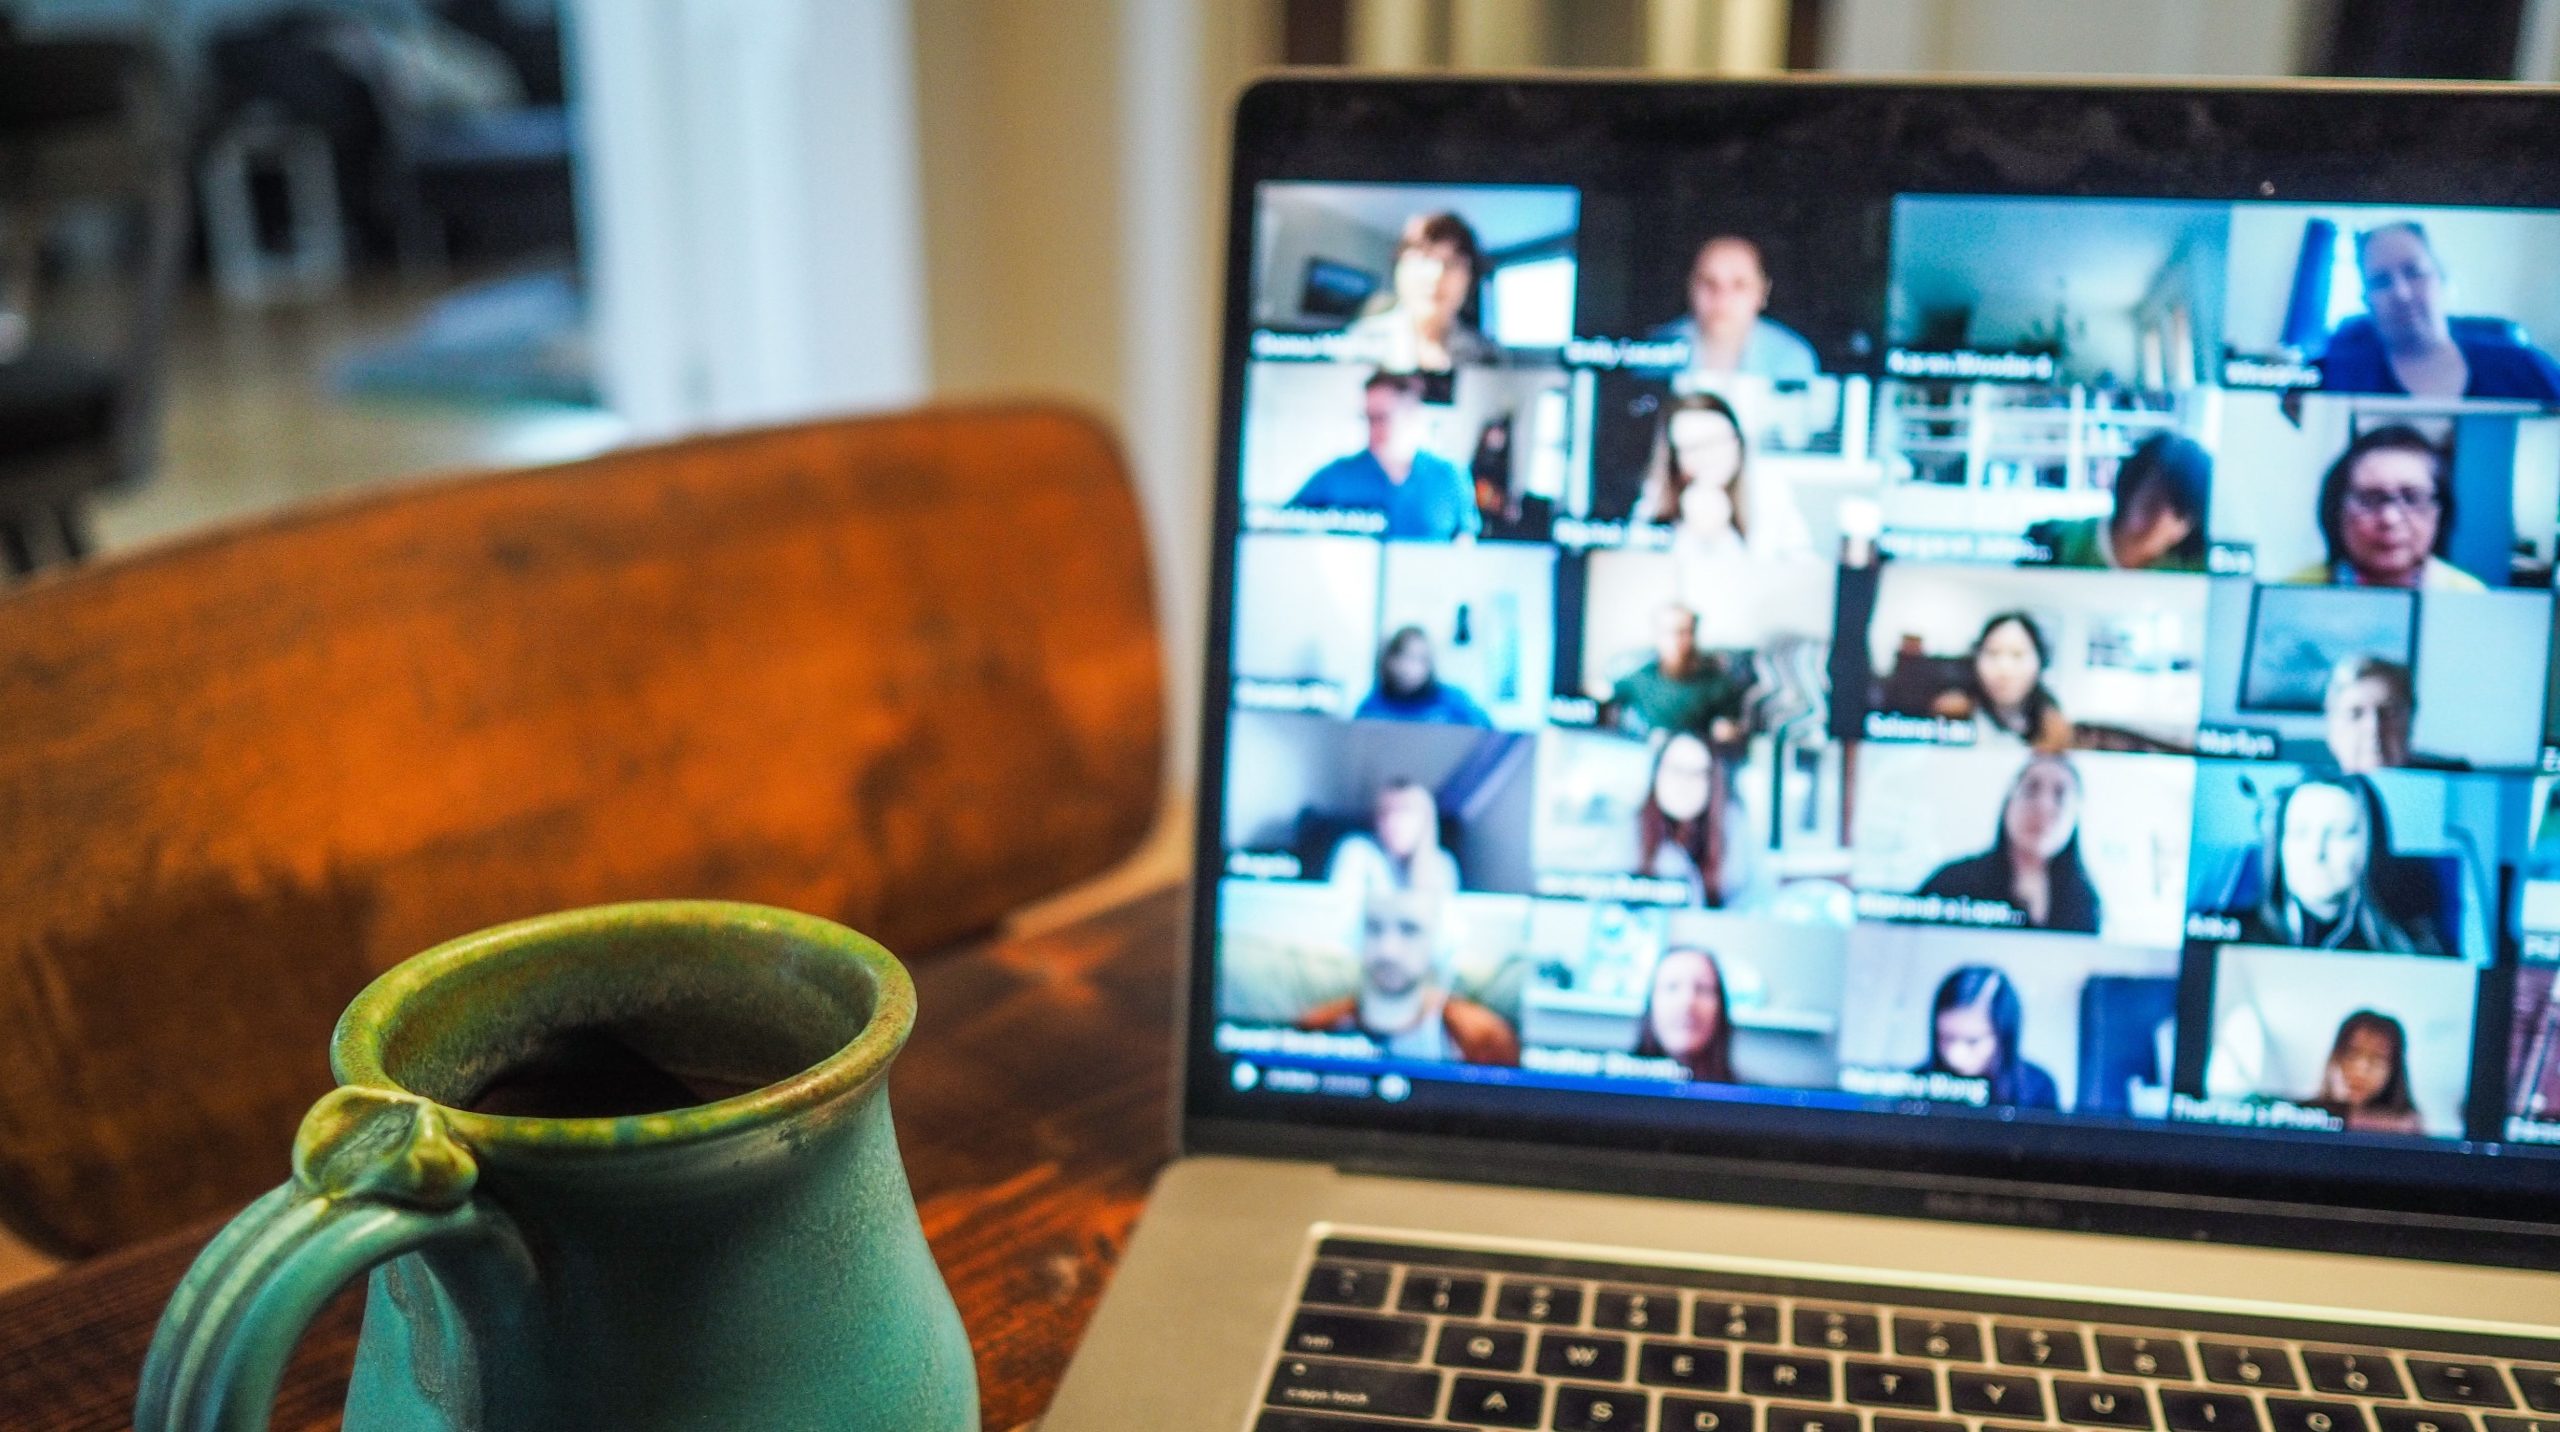 Laptop showing faces of people as part of a video call.